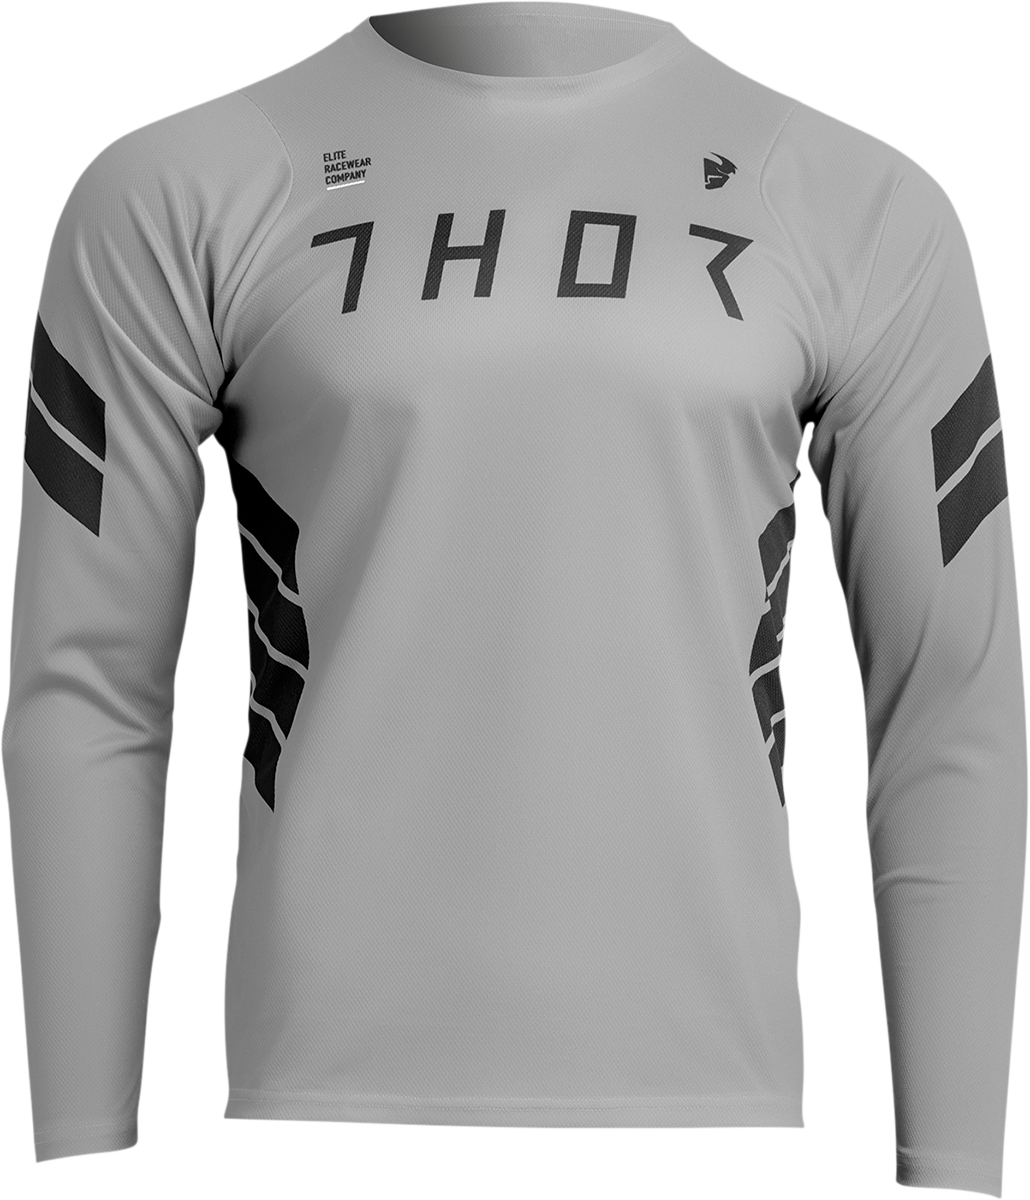 THOR Assist Sting Long-Sleeve Jersey - Gray - 2XL 5020-0042